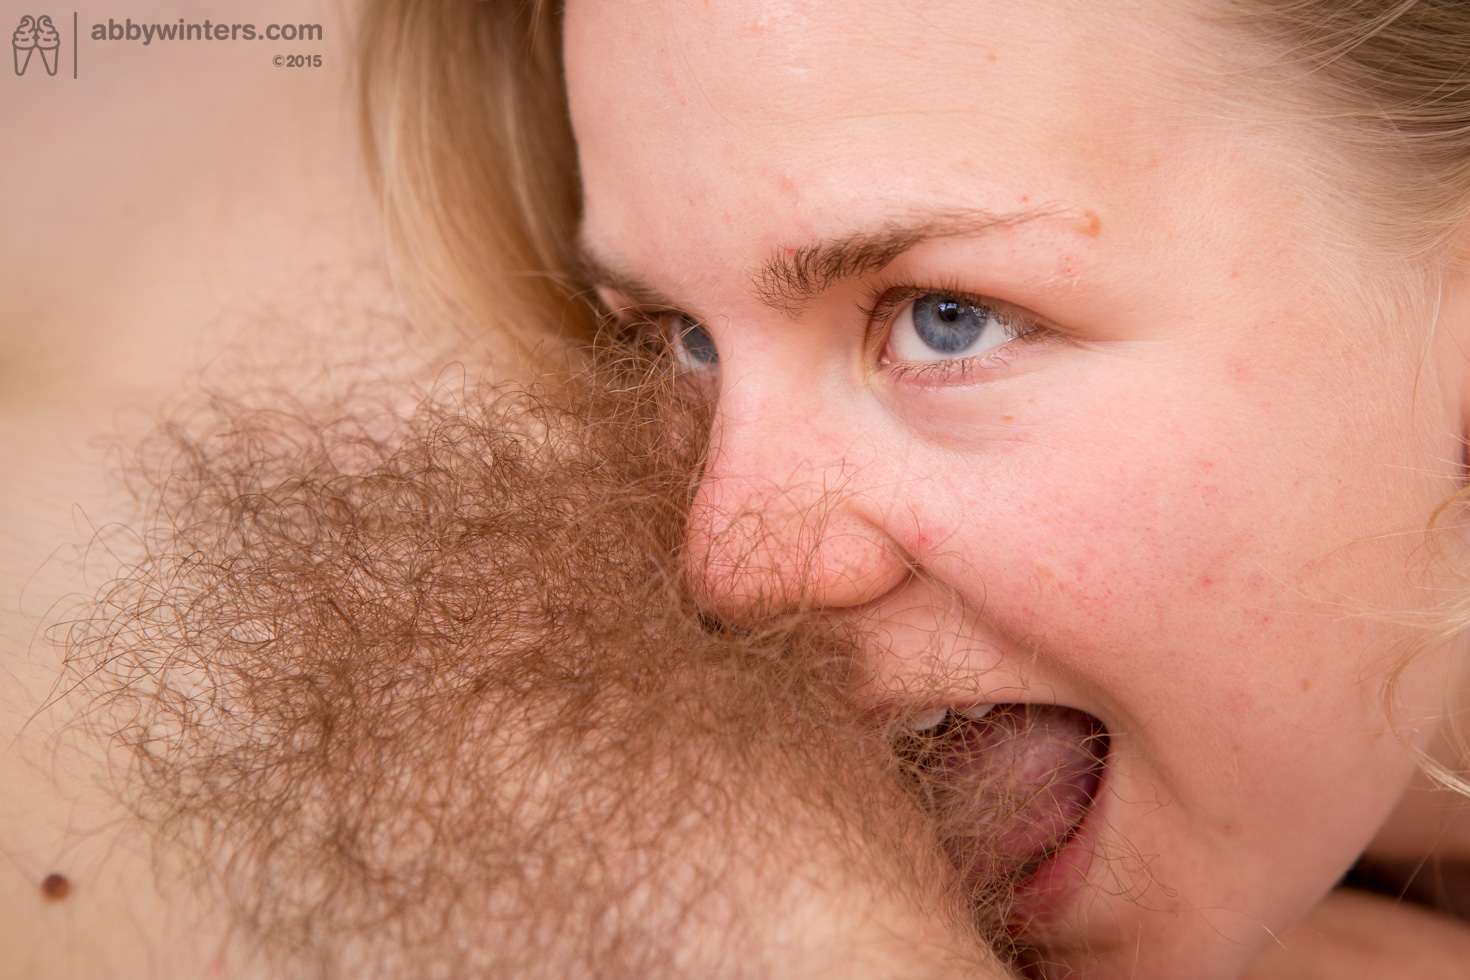 Fisting hairy pussy | The Hairy Lady Blog